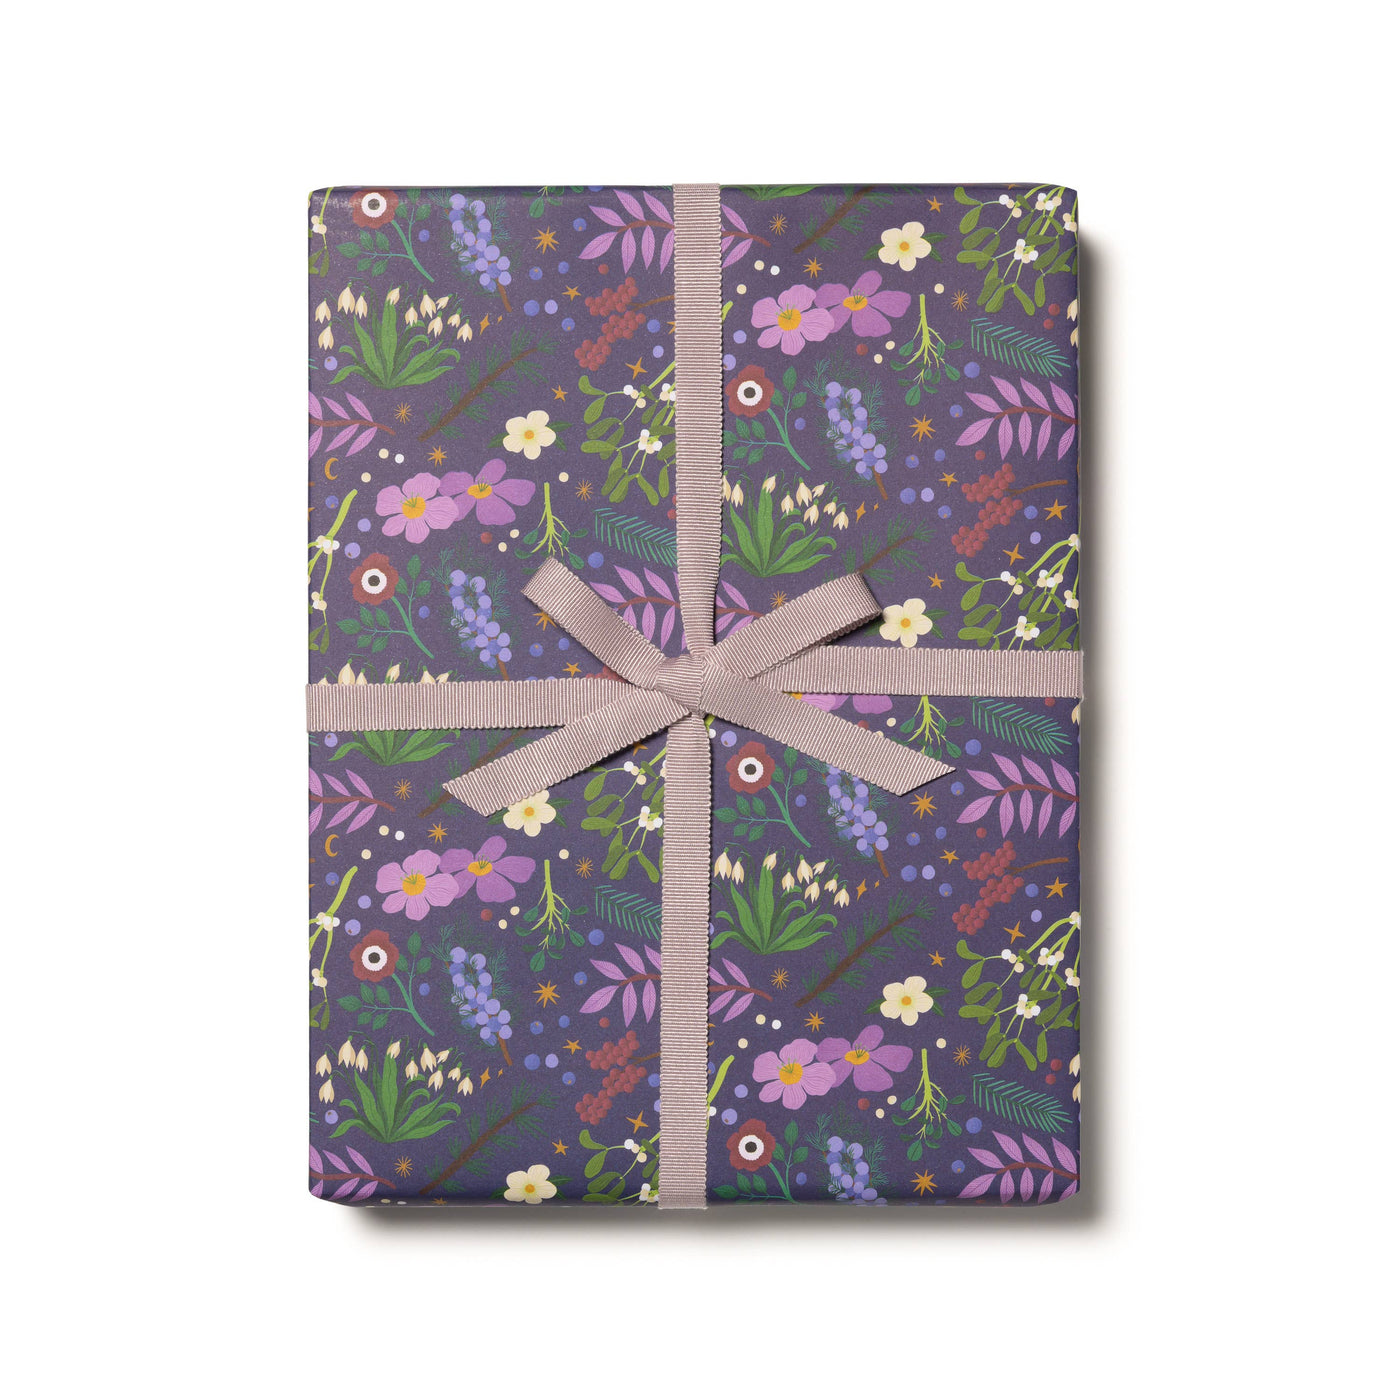 Winter Botanicals holiday wrapping paper rolls